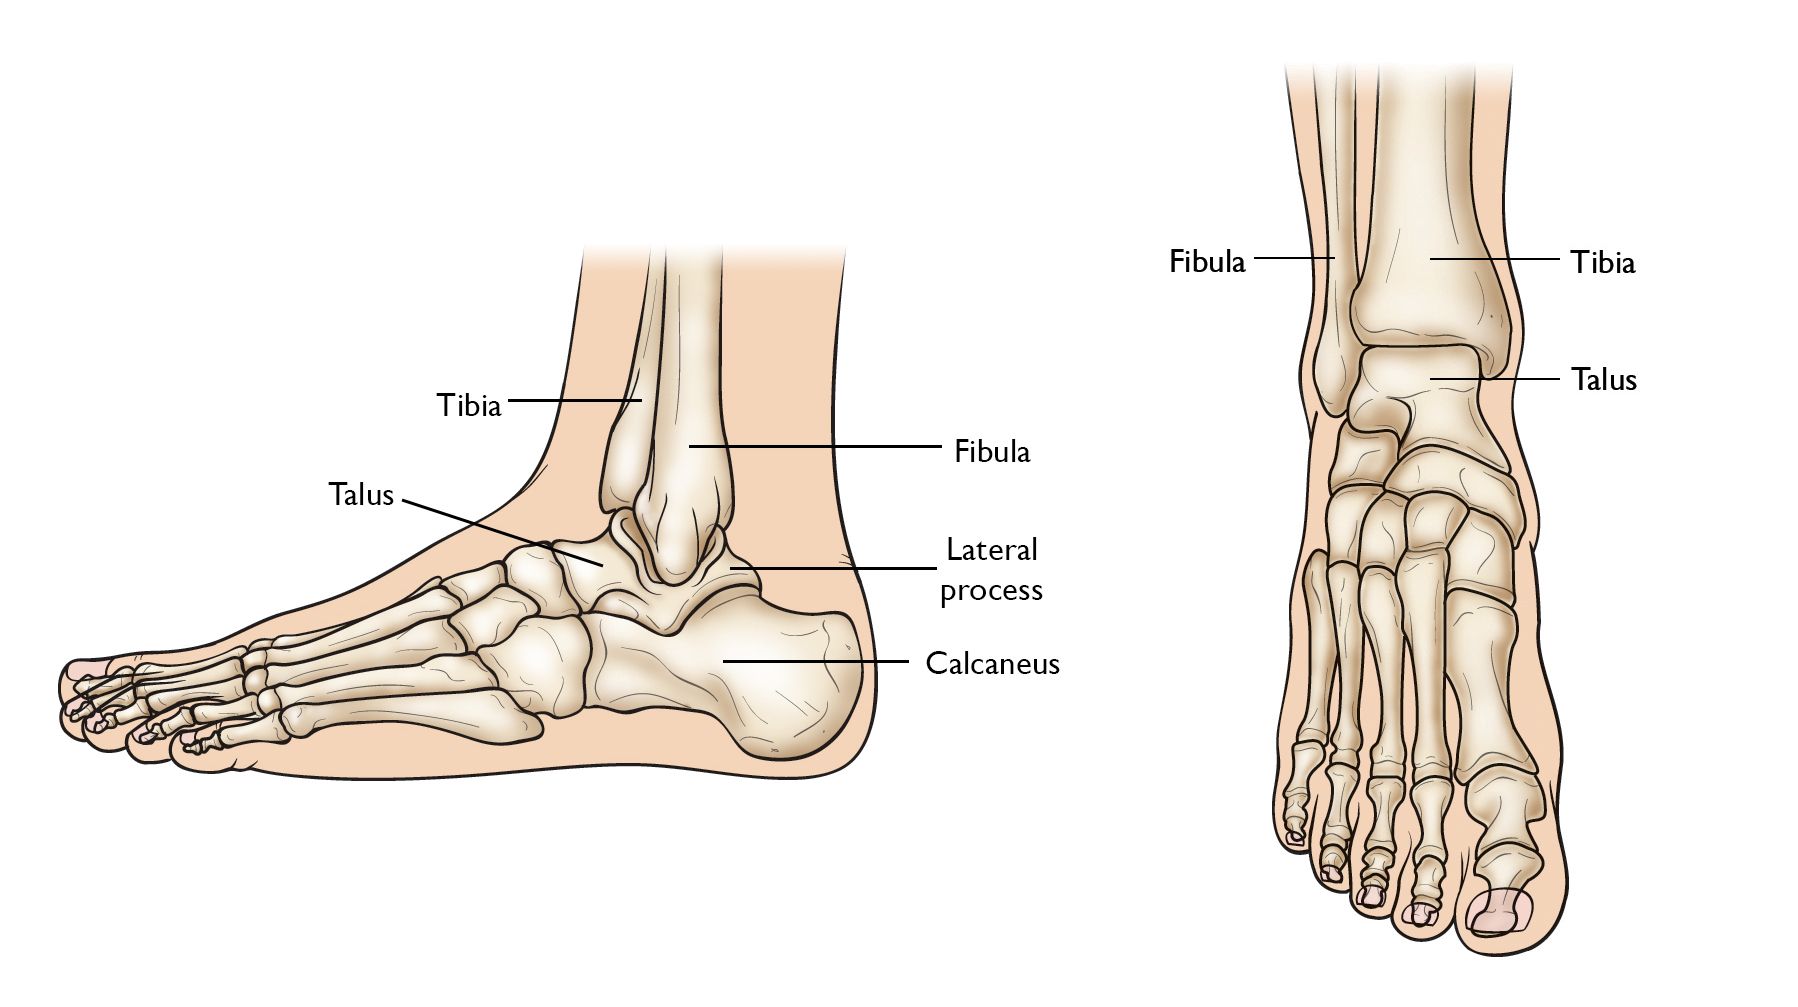 https://orthoinfo.aaos.org/contentassets/e72d8bebf2f74bd490d3c500bd53be87/a00170f01_foot_ankle-anatomy-compressor.jpg